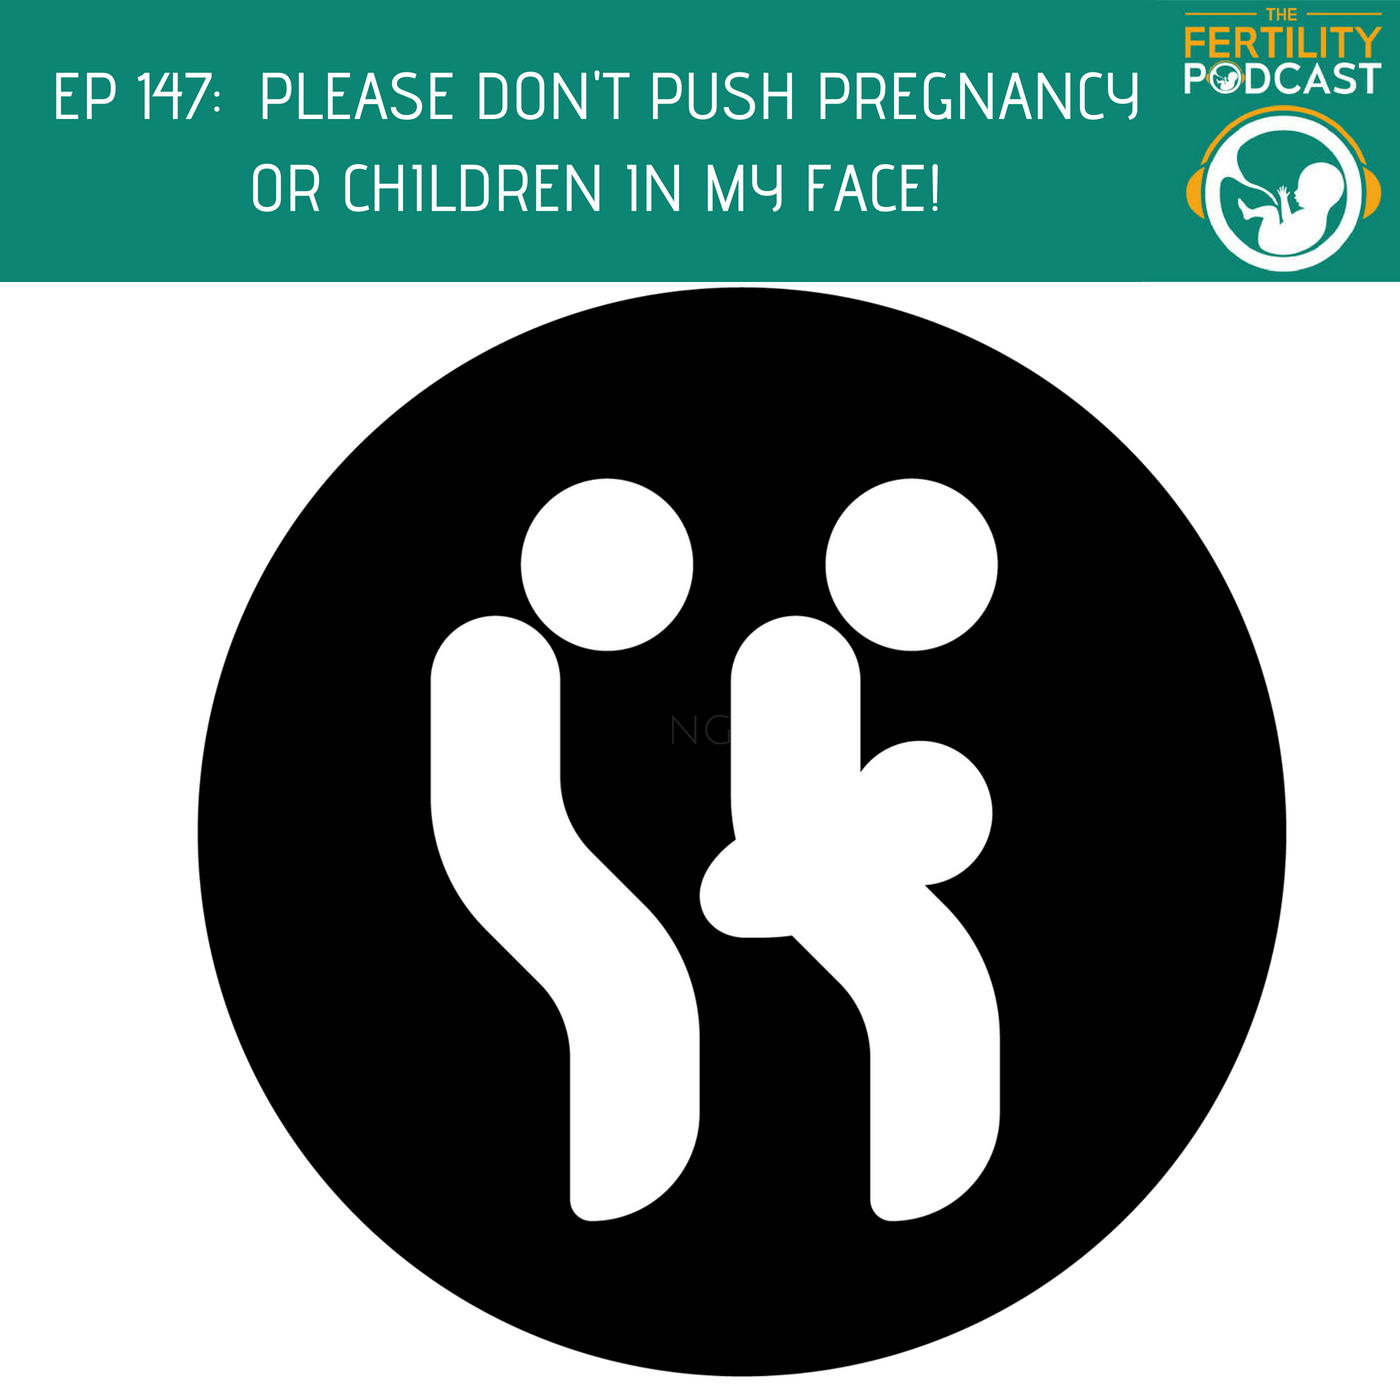 How do I stop people pushing pregnancy in my face?